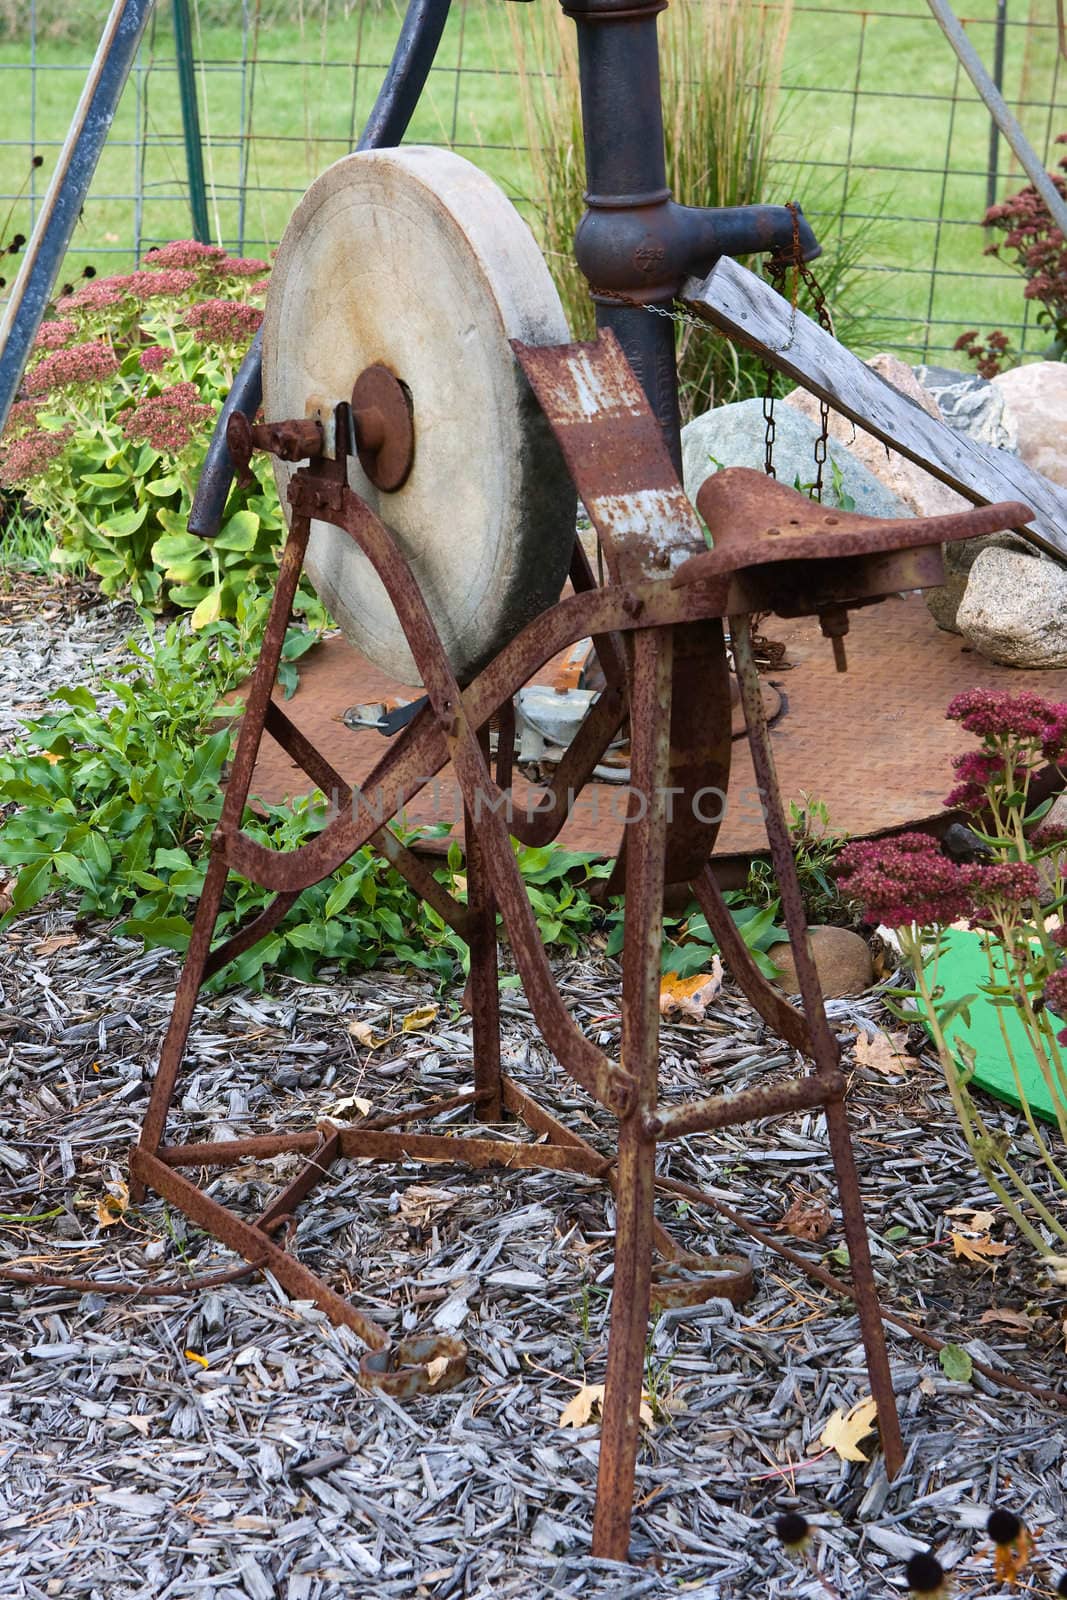 An Antique sit-down Grinding Wheel (Sharpening Stone).